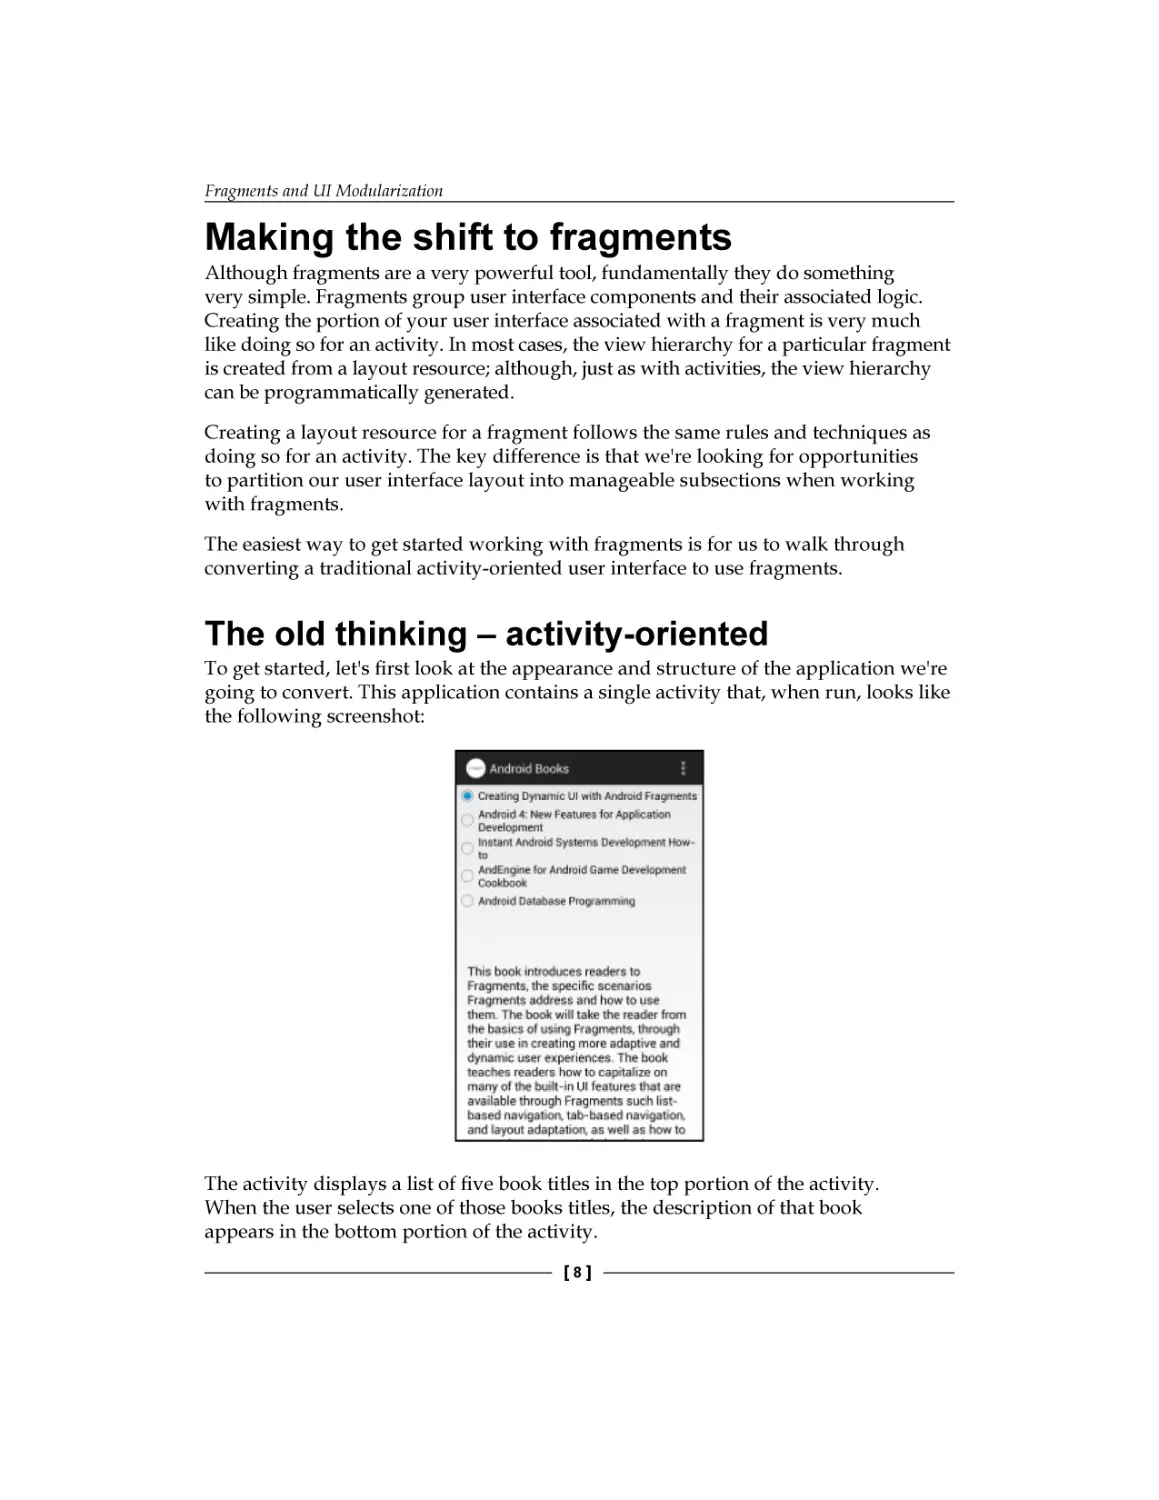 Making the shift to fragments
The old thinking – activity-oriented